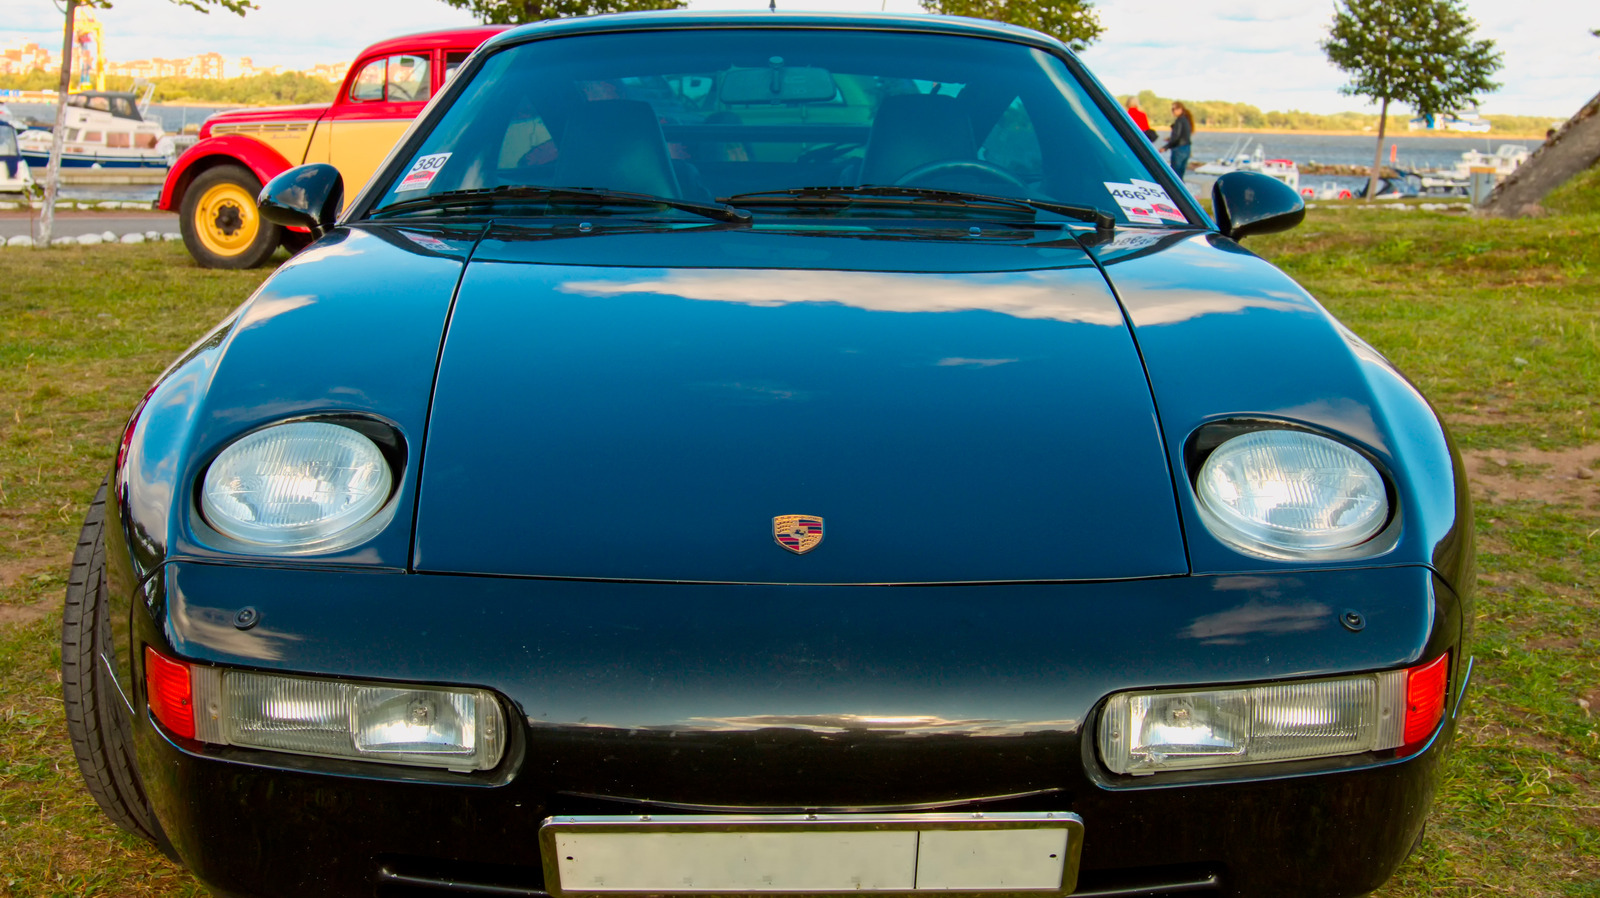 bue navigation Profet Here's What Happened To The Infamous Porsche 928 From The 'Top Gear' Patagonia  Special